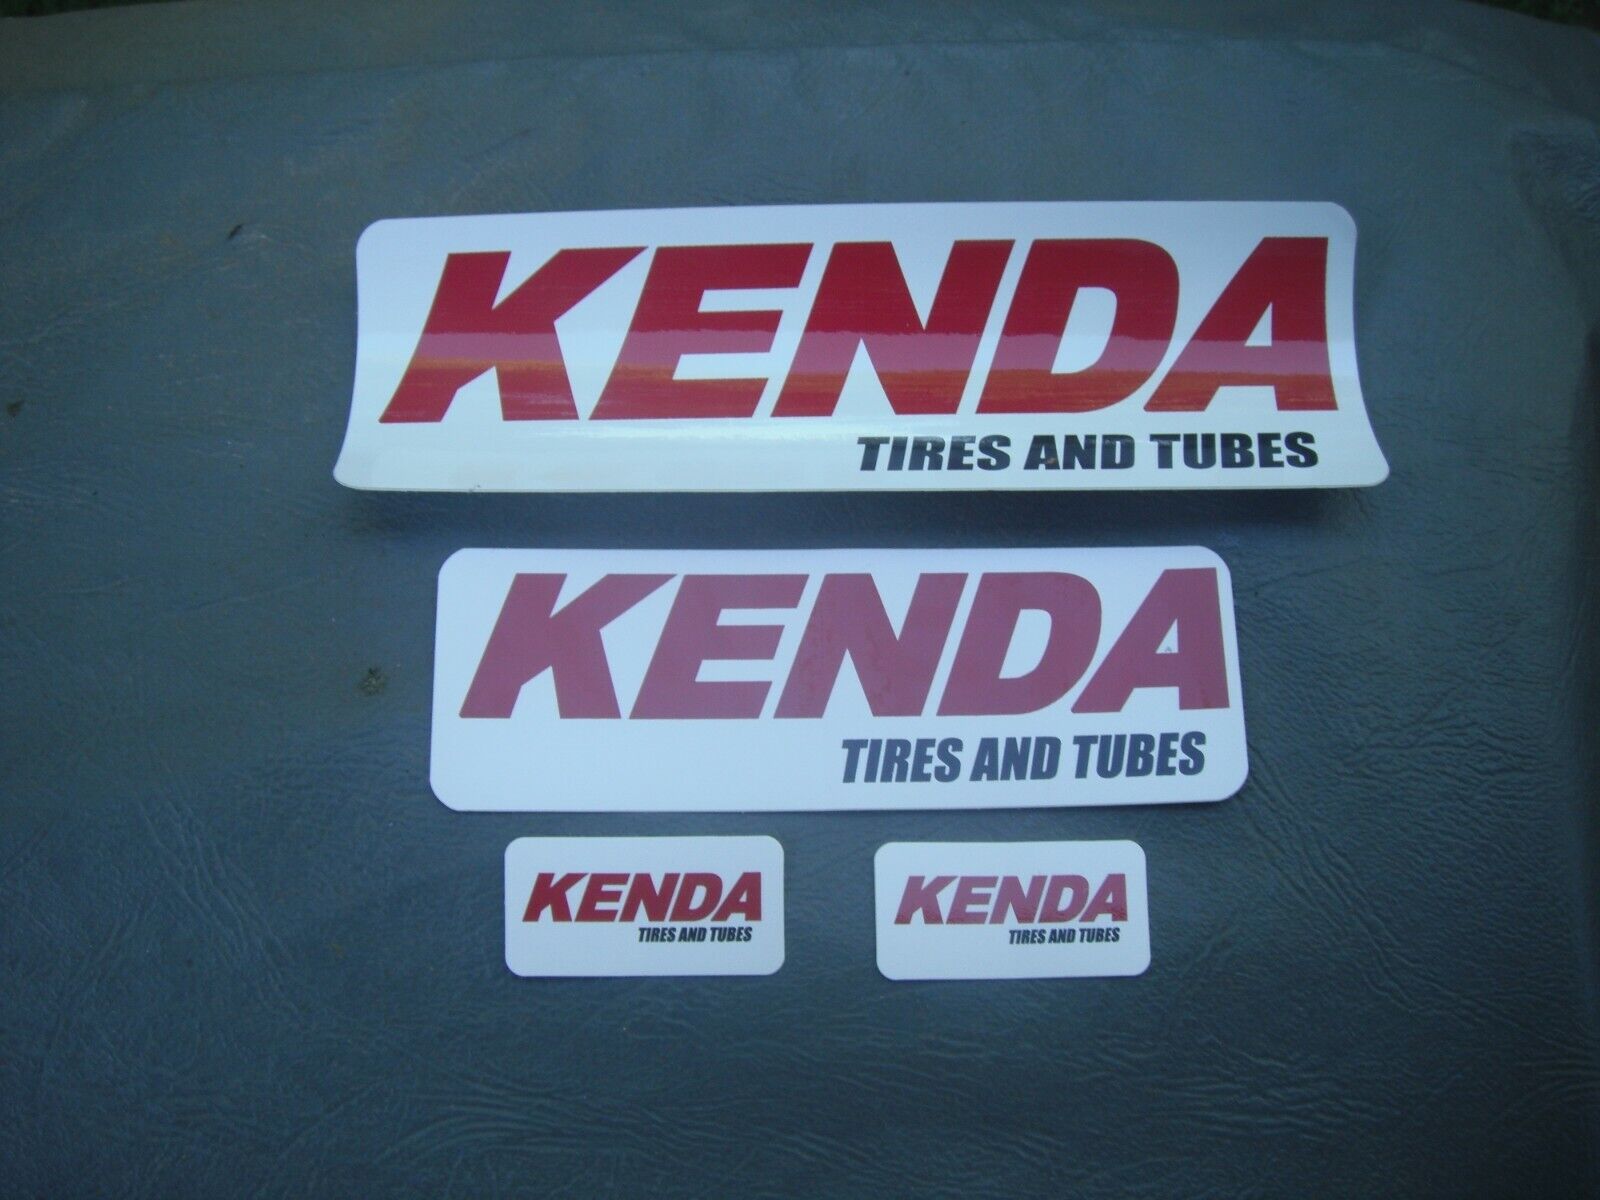 Kenda Tires And Tubes Bicycle Bike Decals Stickers Original Free Shipping!!!